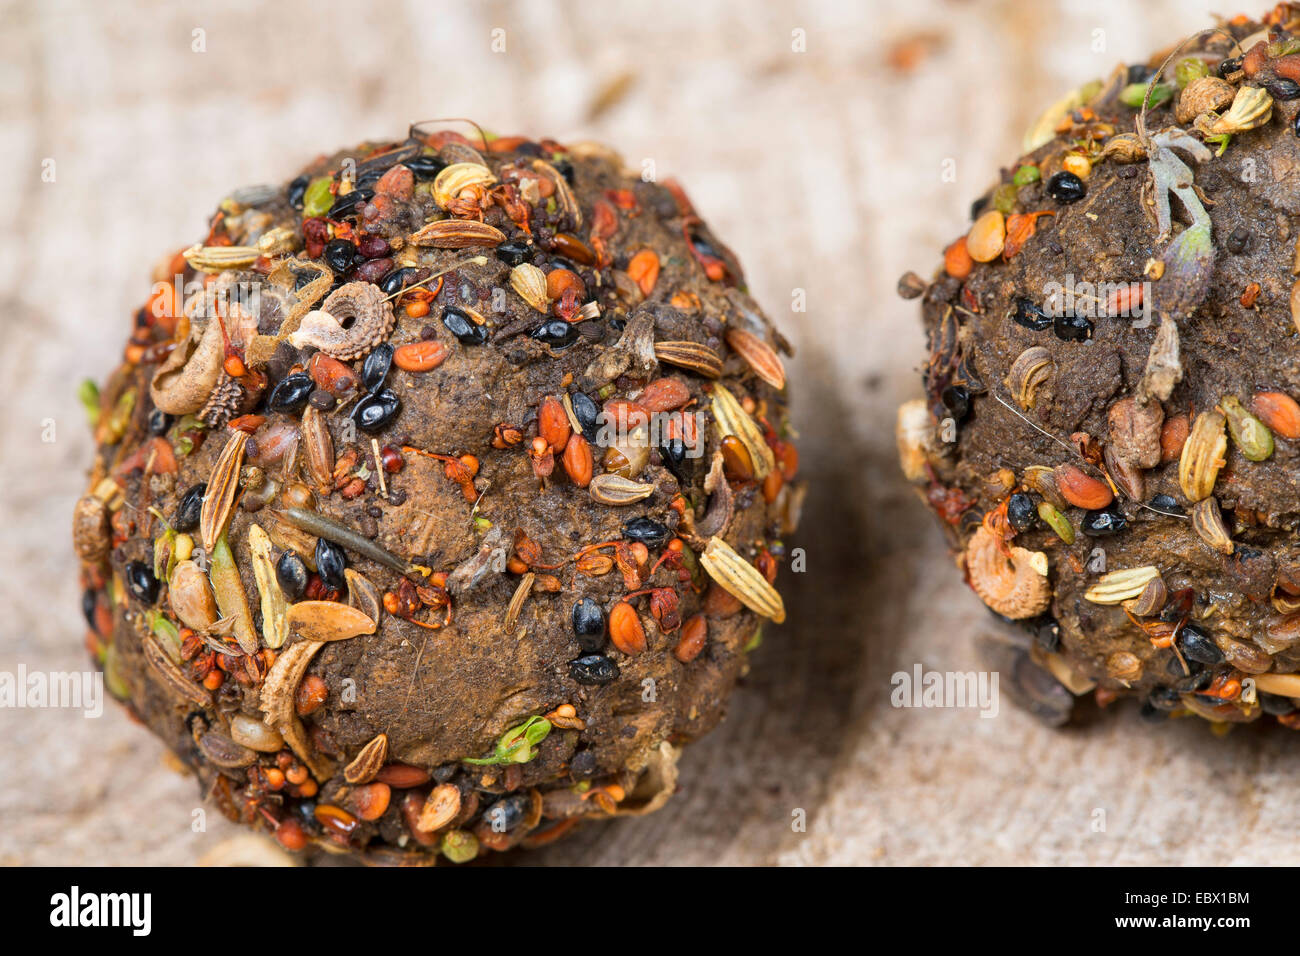 seed bombs with different seeds and fruits and soil, Germany Stock Photo